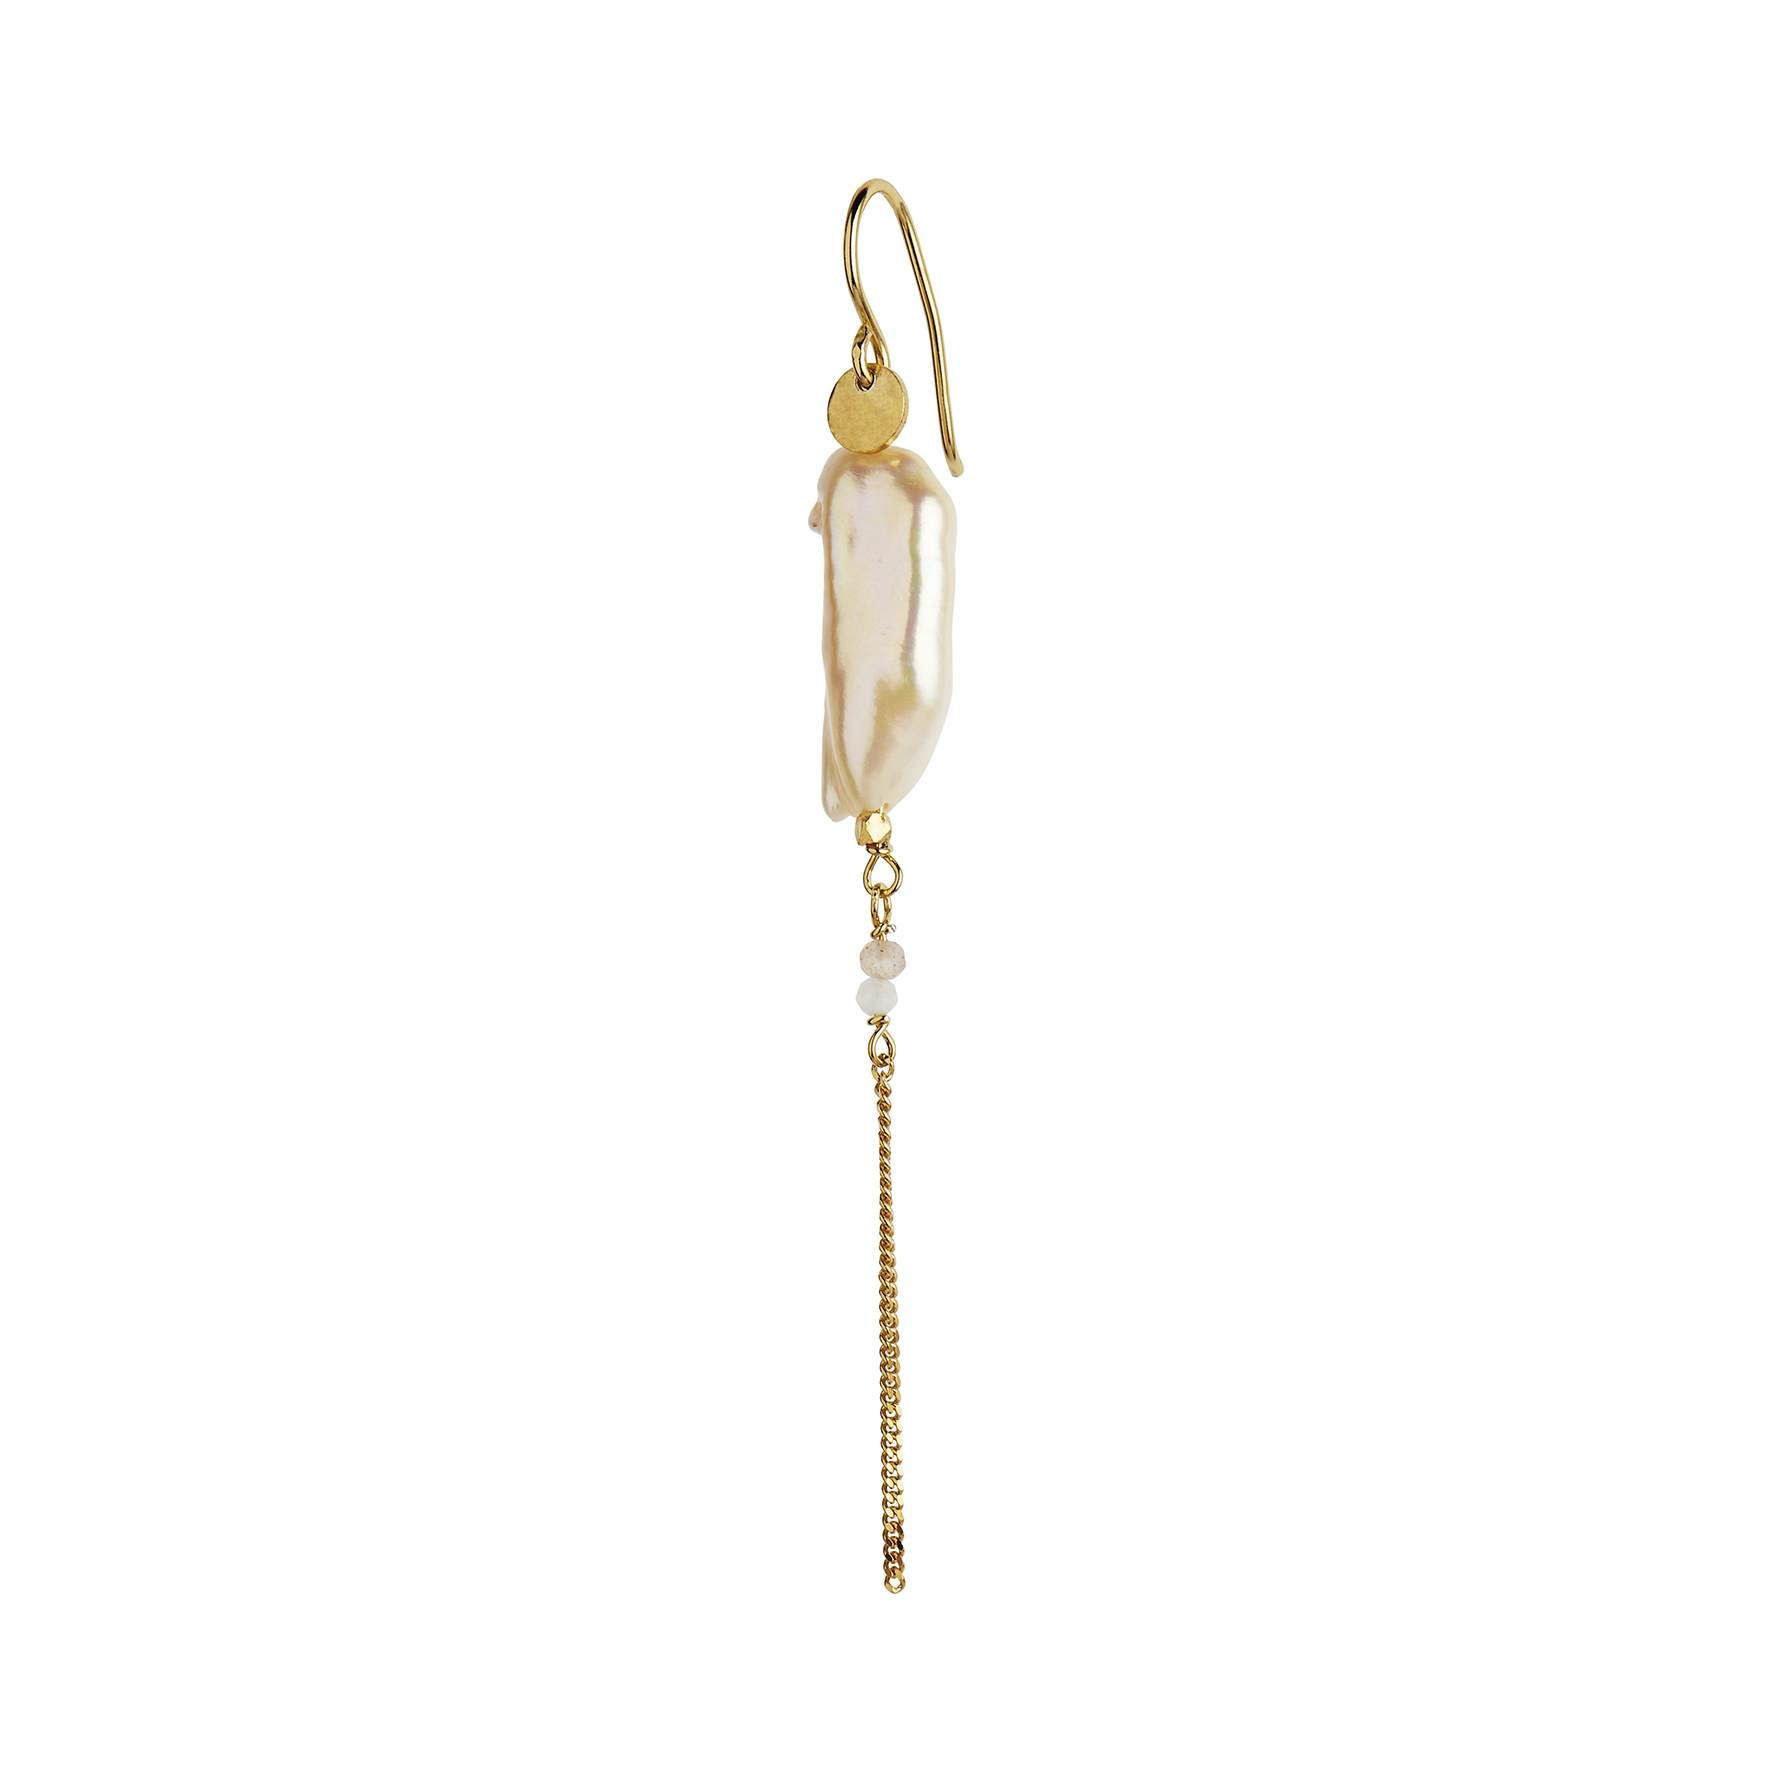 Long Baroque Pearl with Chain Earring Peach Sorbet from STINE A Jewelry in Goldplated-Silver Sterling 925|Freshwater Pearl